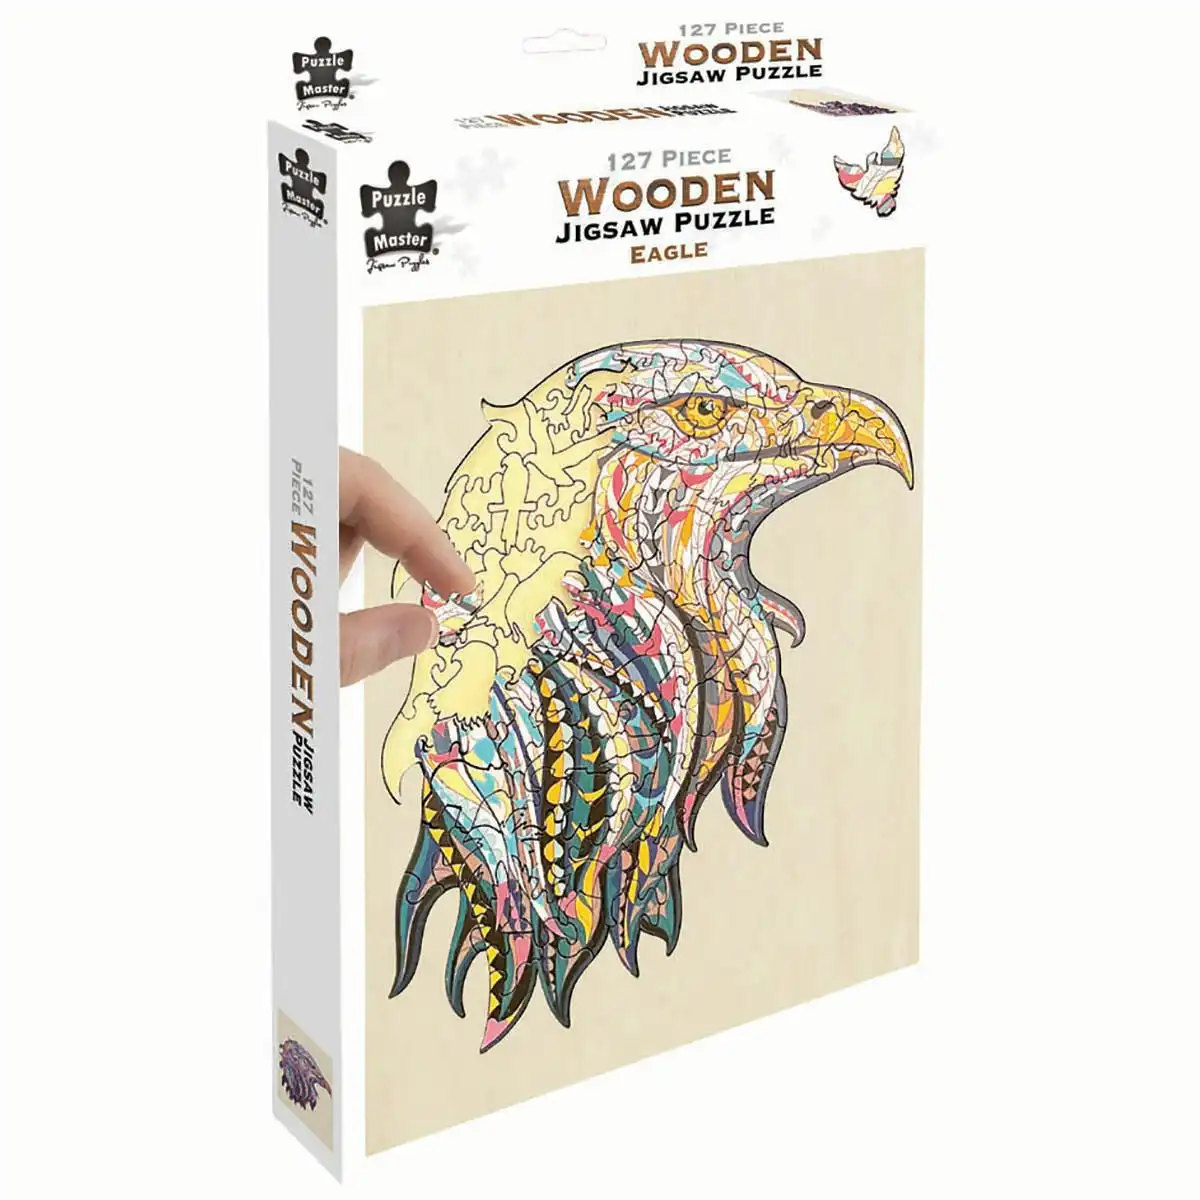 Puzzle Master Wooden Jigsaw Puzzle, Eagle- 127pc